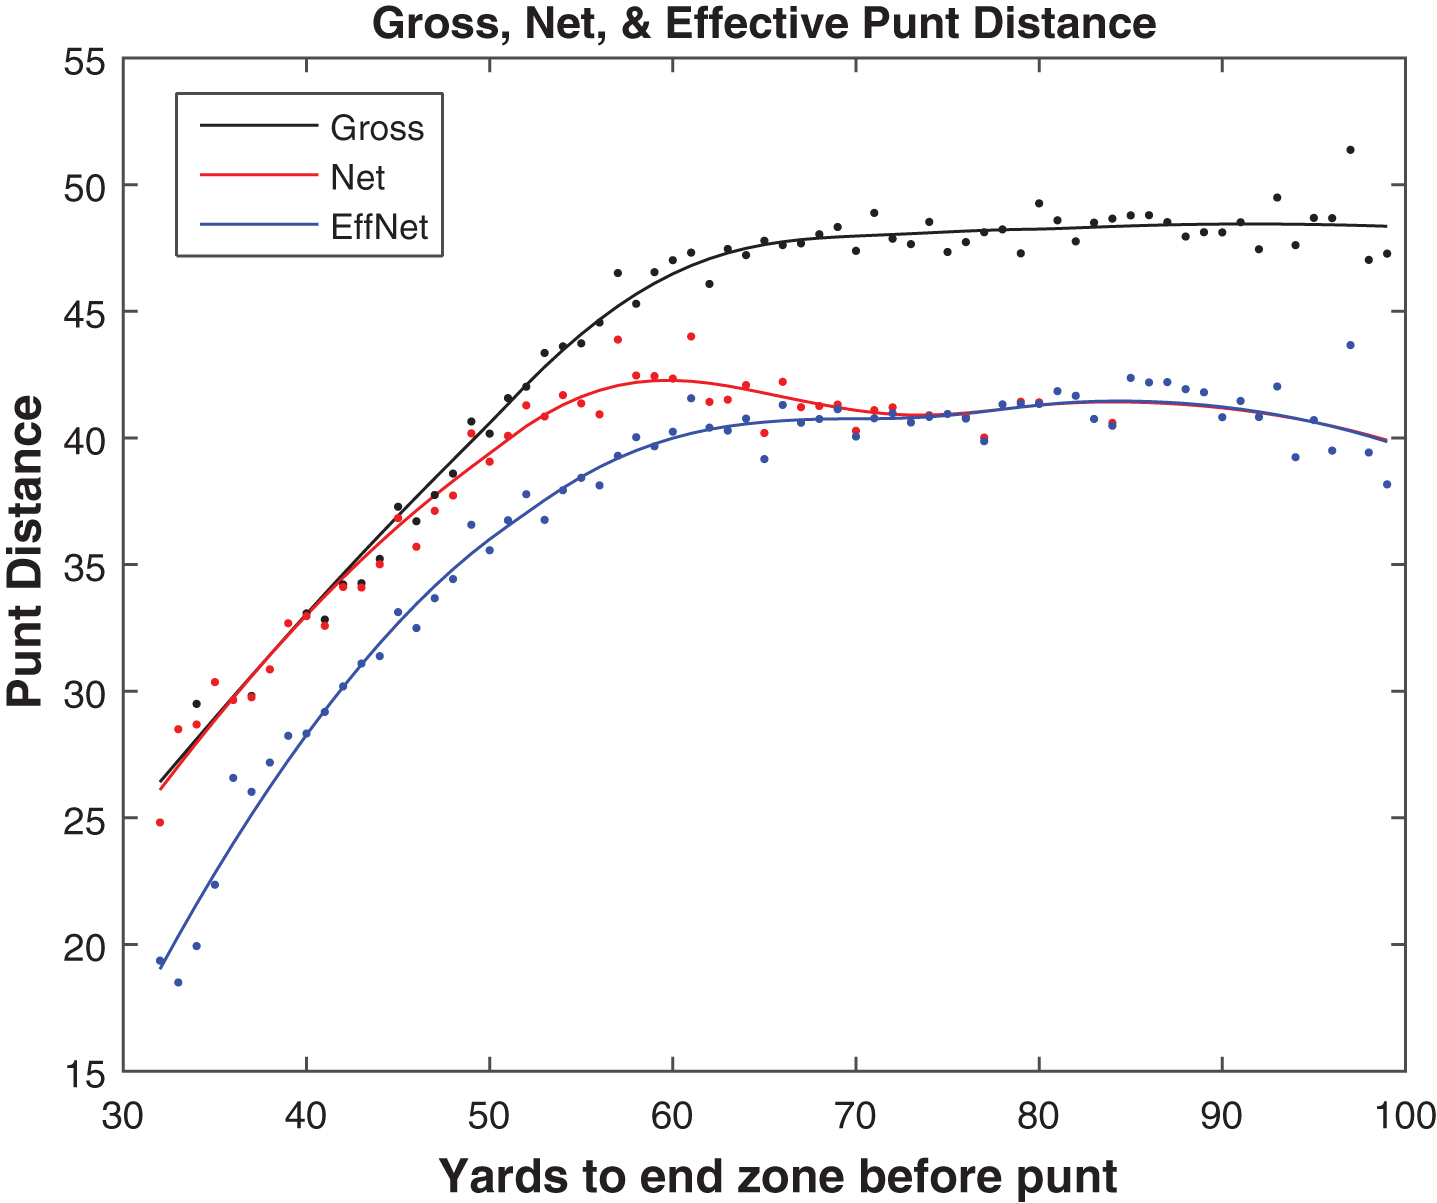 Gross, net, and effective net punt averages by field position, 2010– 2014.